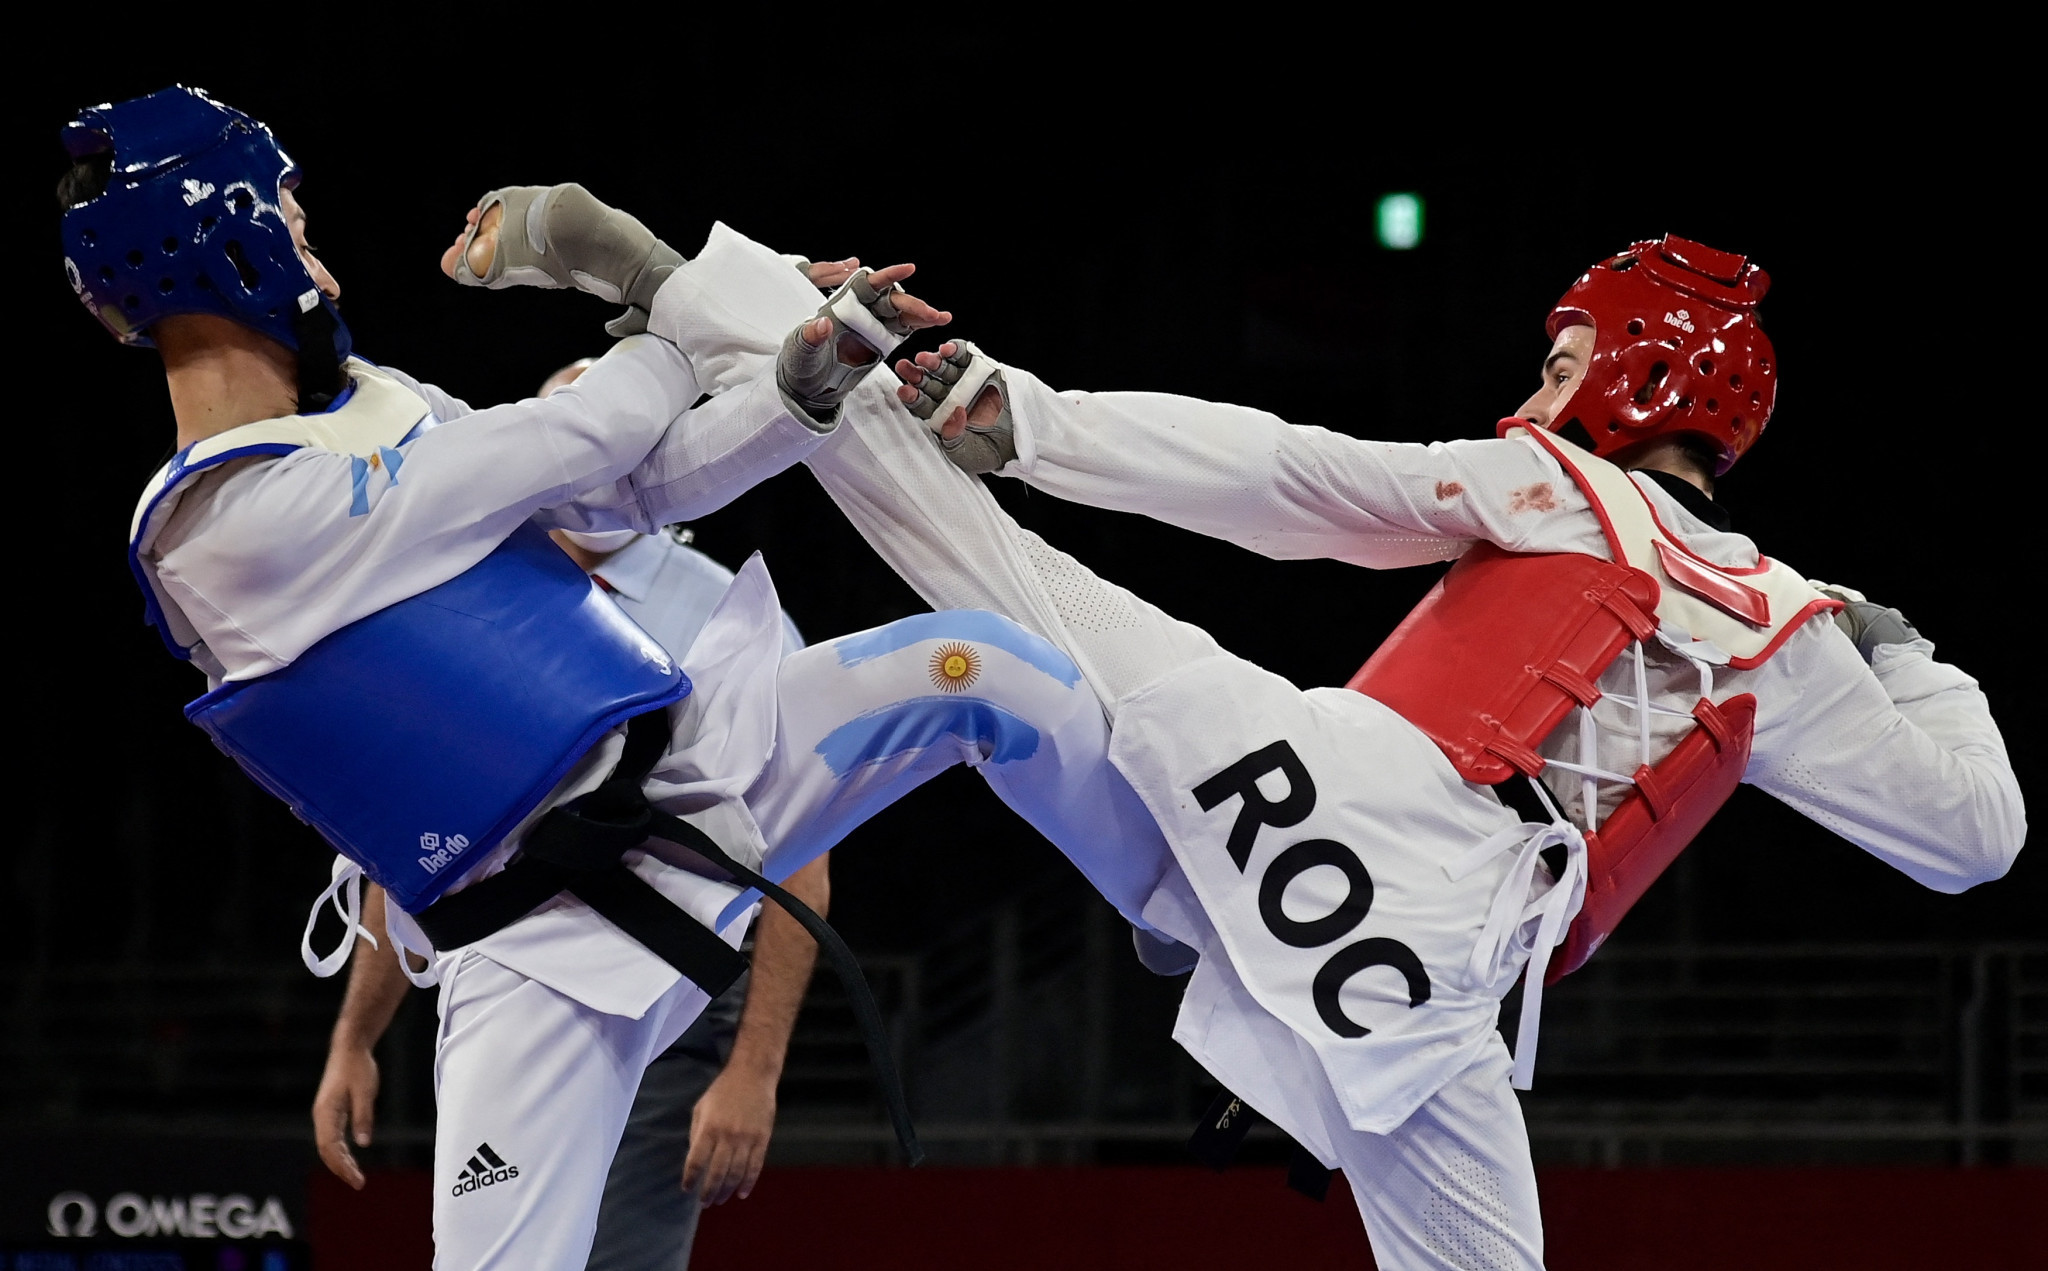 Exclusive: Mexican Taekwondo Federation President hopes Russian athletes will be readmitted